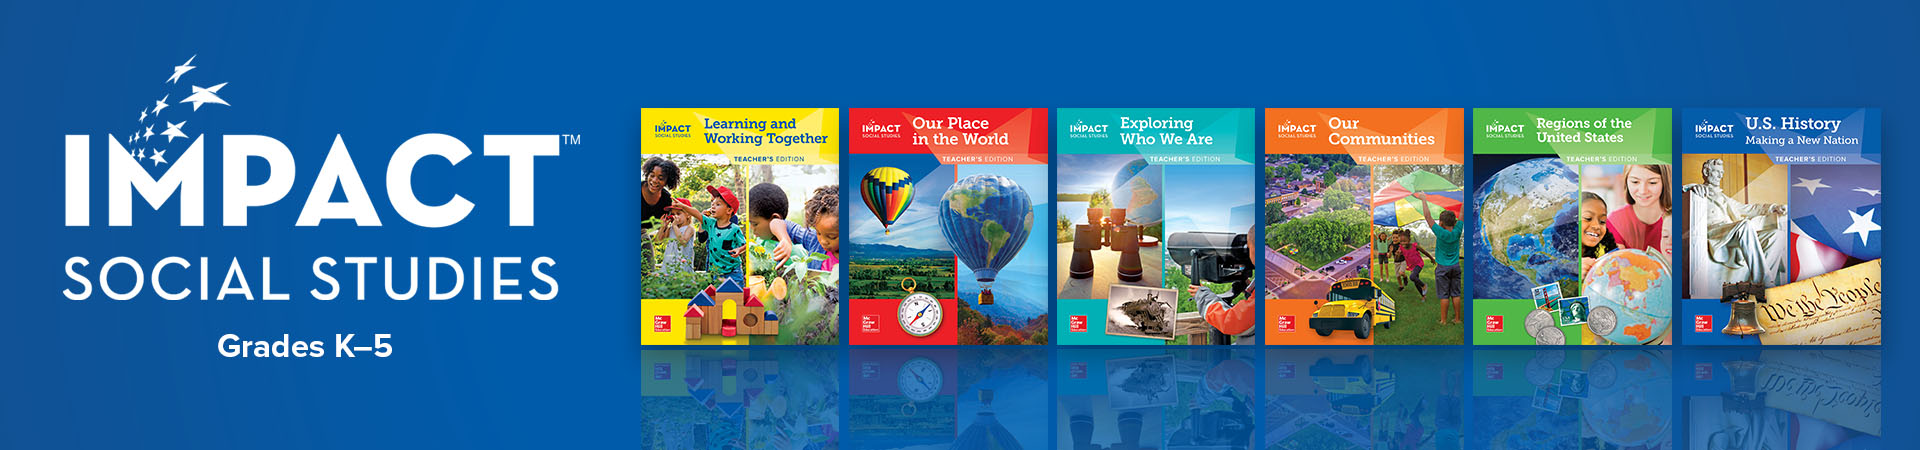 logo and textbook covers for impact elementary social studies curriculum